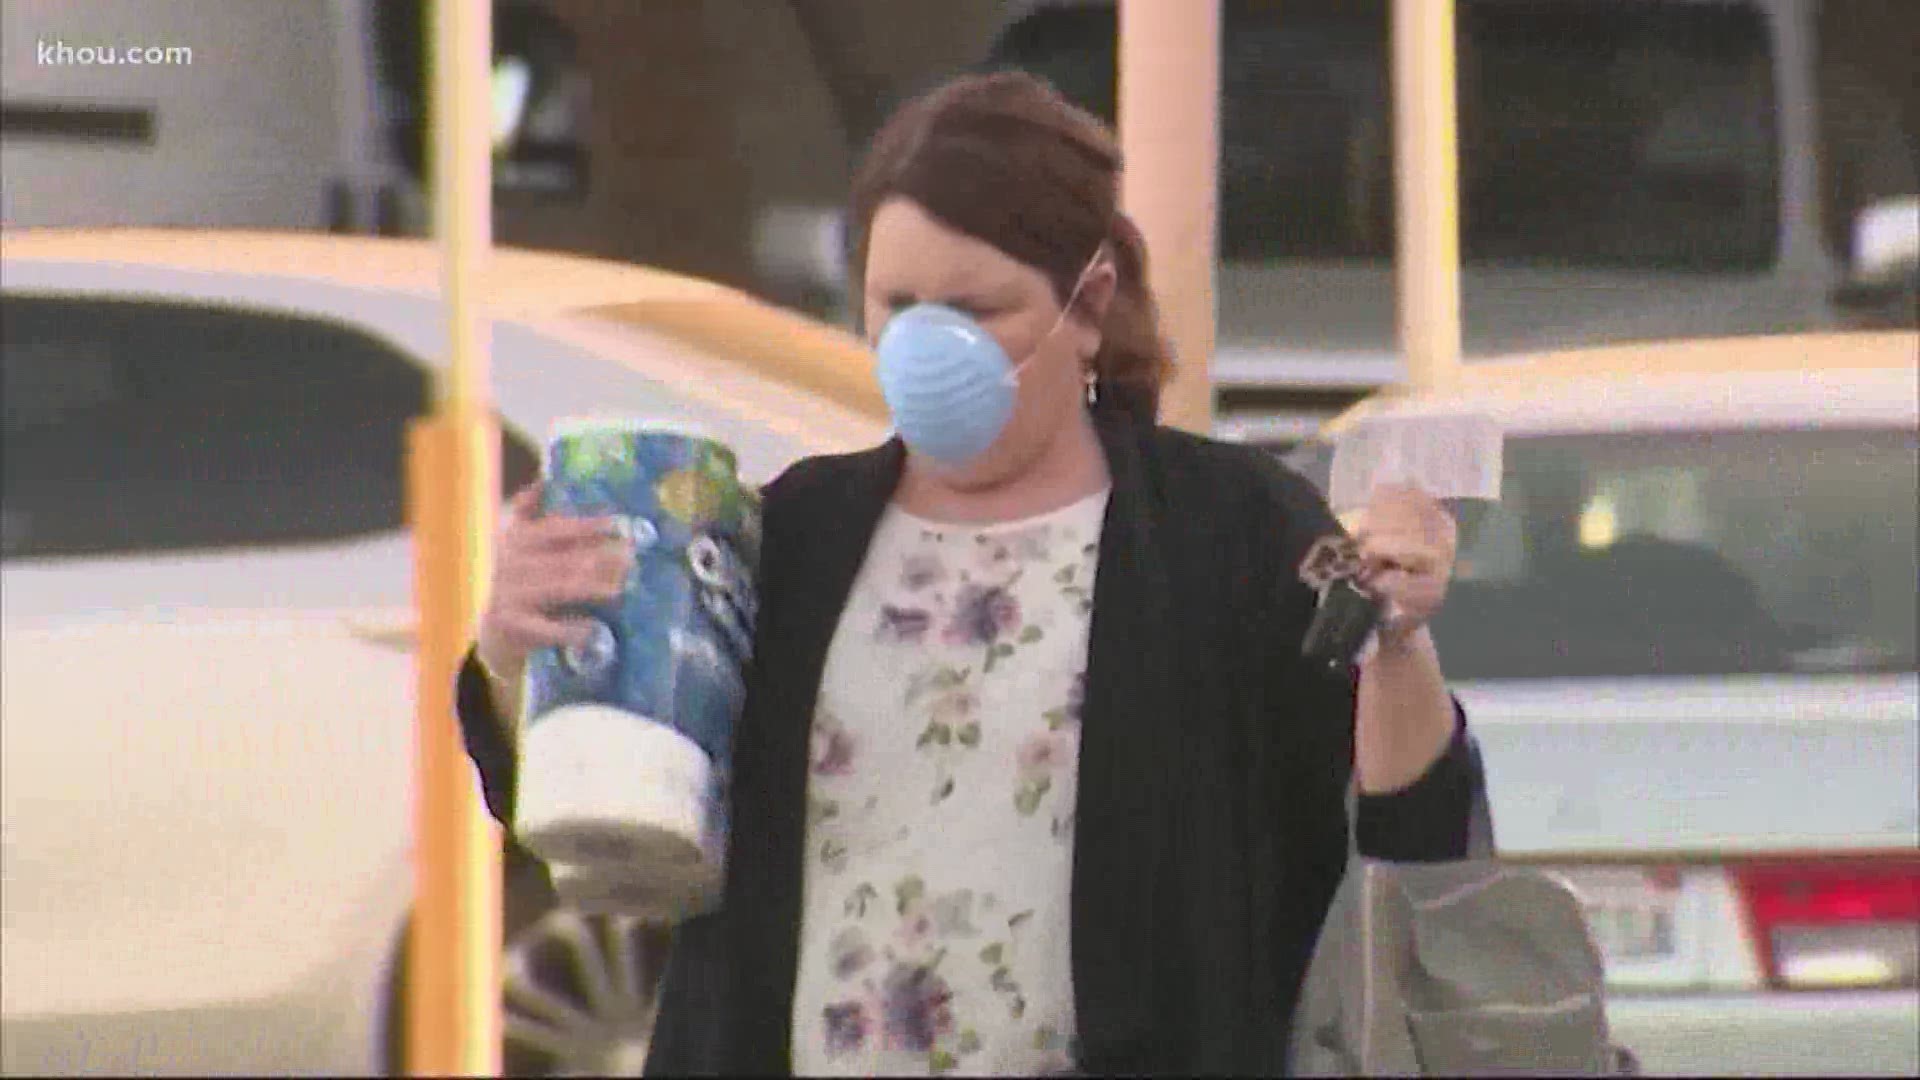 Harris County's new mask mandate is in effect Monday. Violators could face an up to $1,000 fine, but Judge Lina Hildago says the goal is still to educate the public.